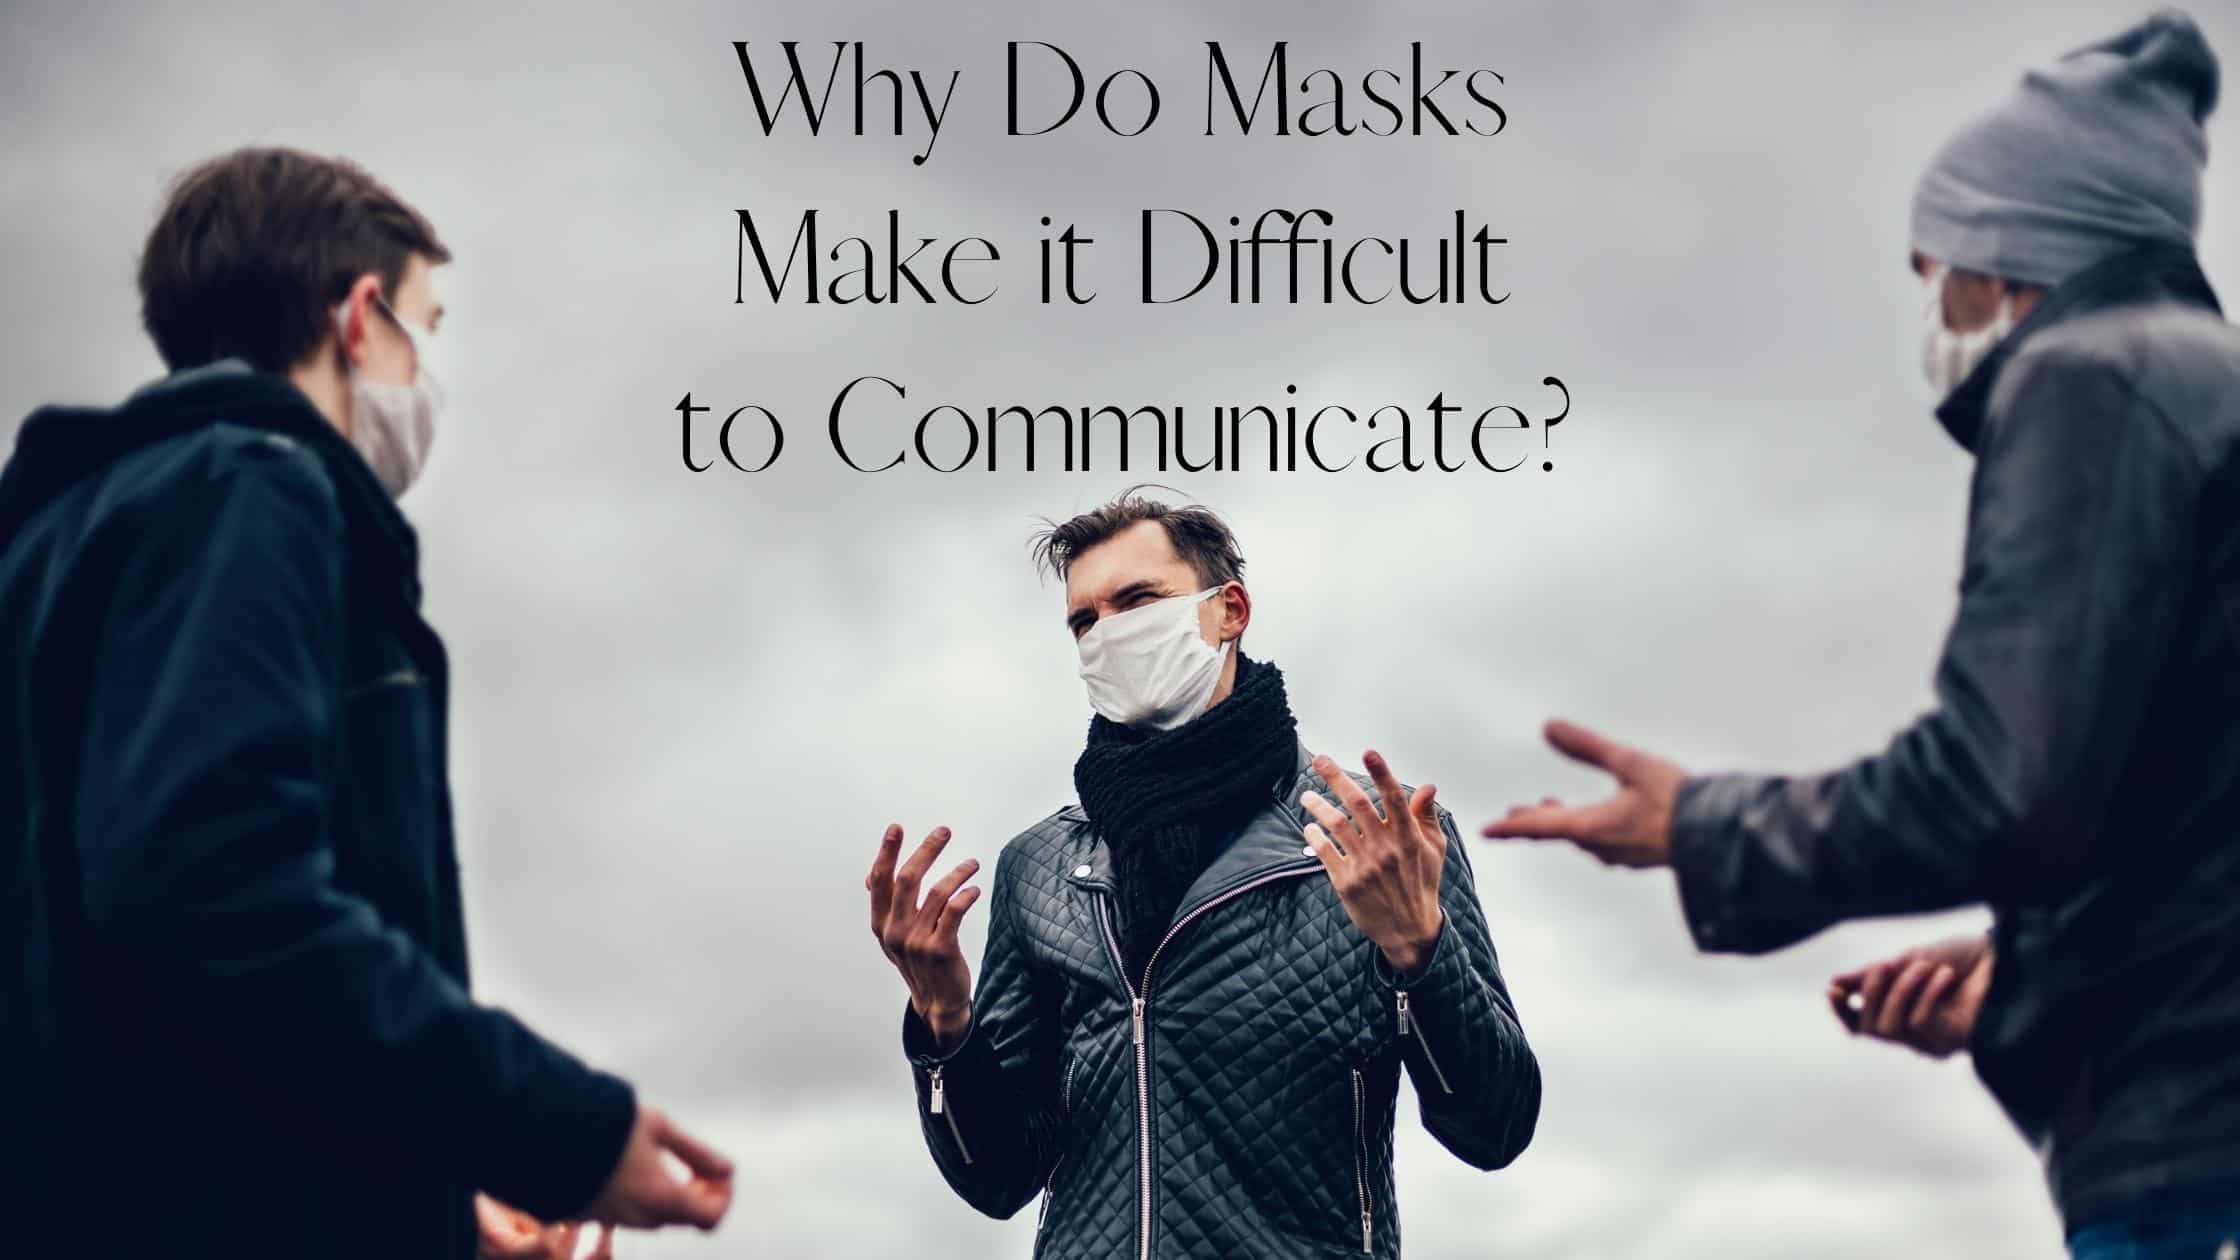 Featured image for “Why Do Masks Make it Difficult to Communicate?”